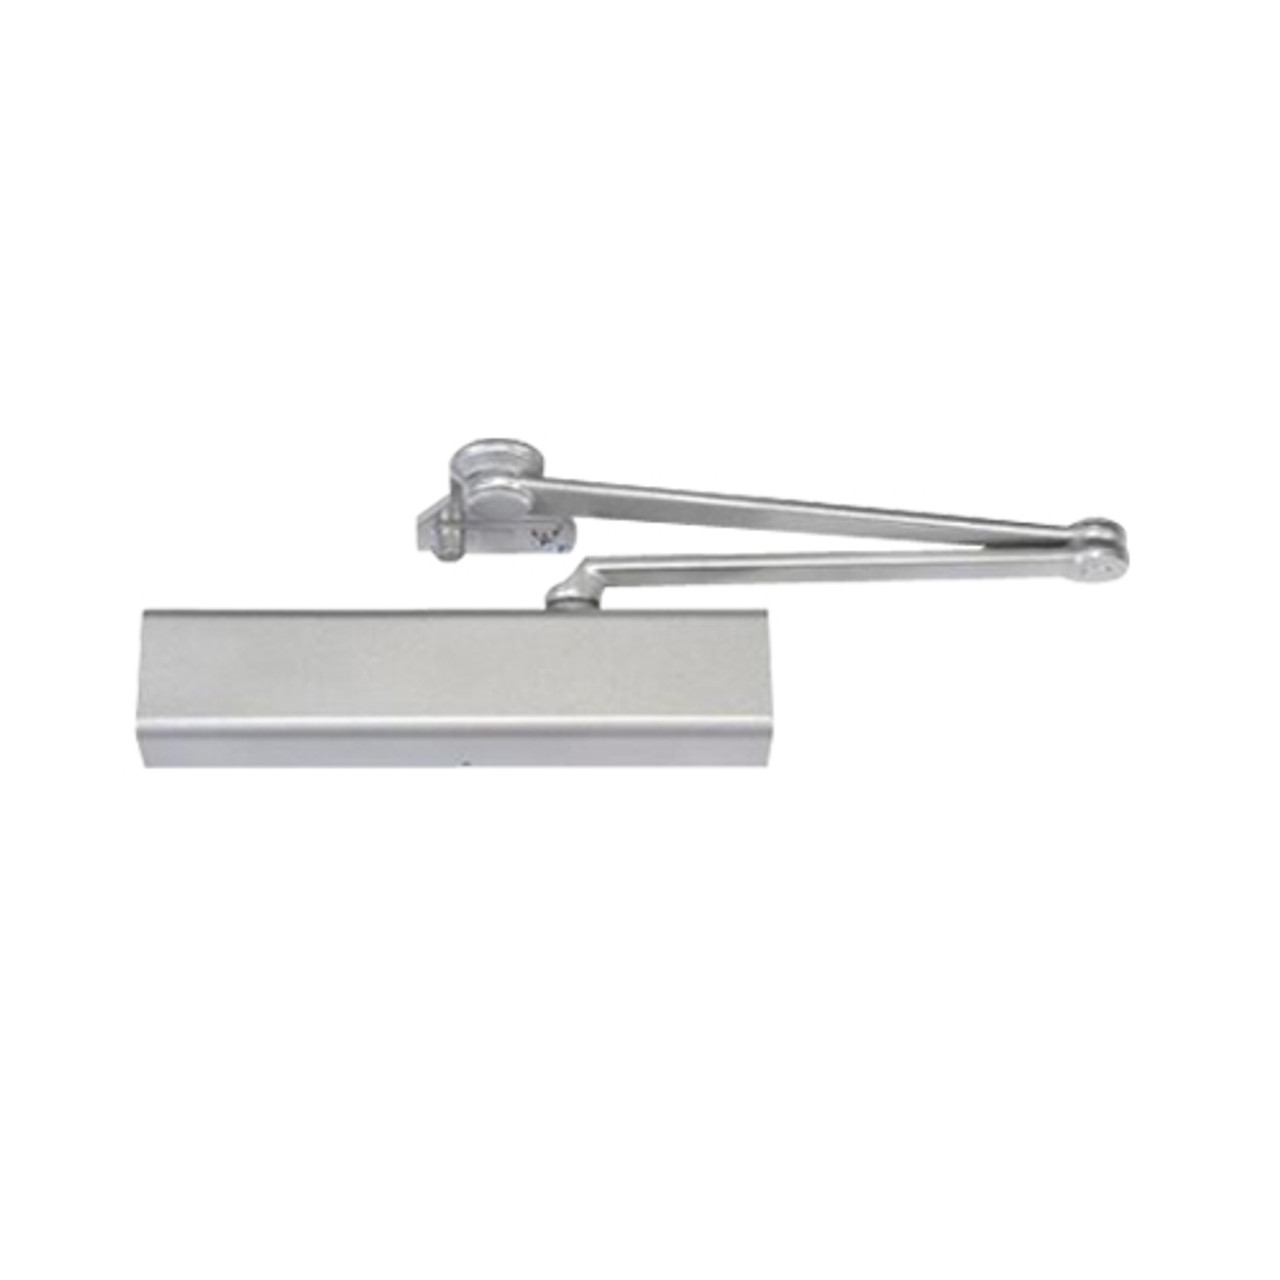 CLP8501A-689 Norton 8000 Series Full Cover Non-Hold Open Door Closers with CloserPlus Arm in Aluminum Finish